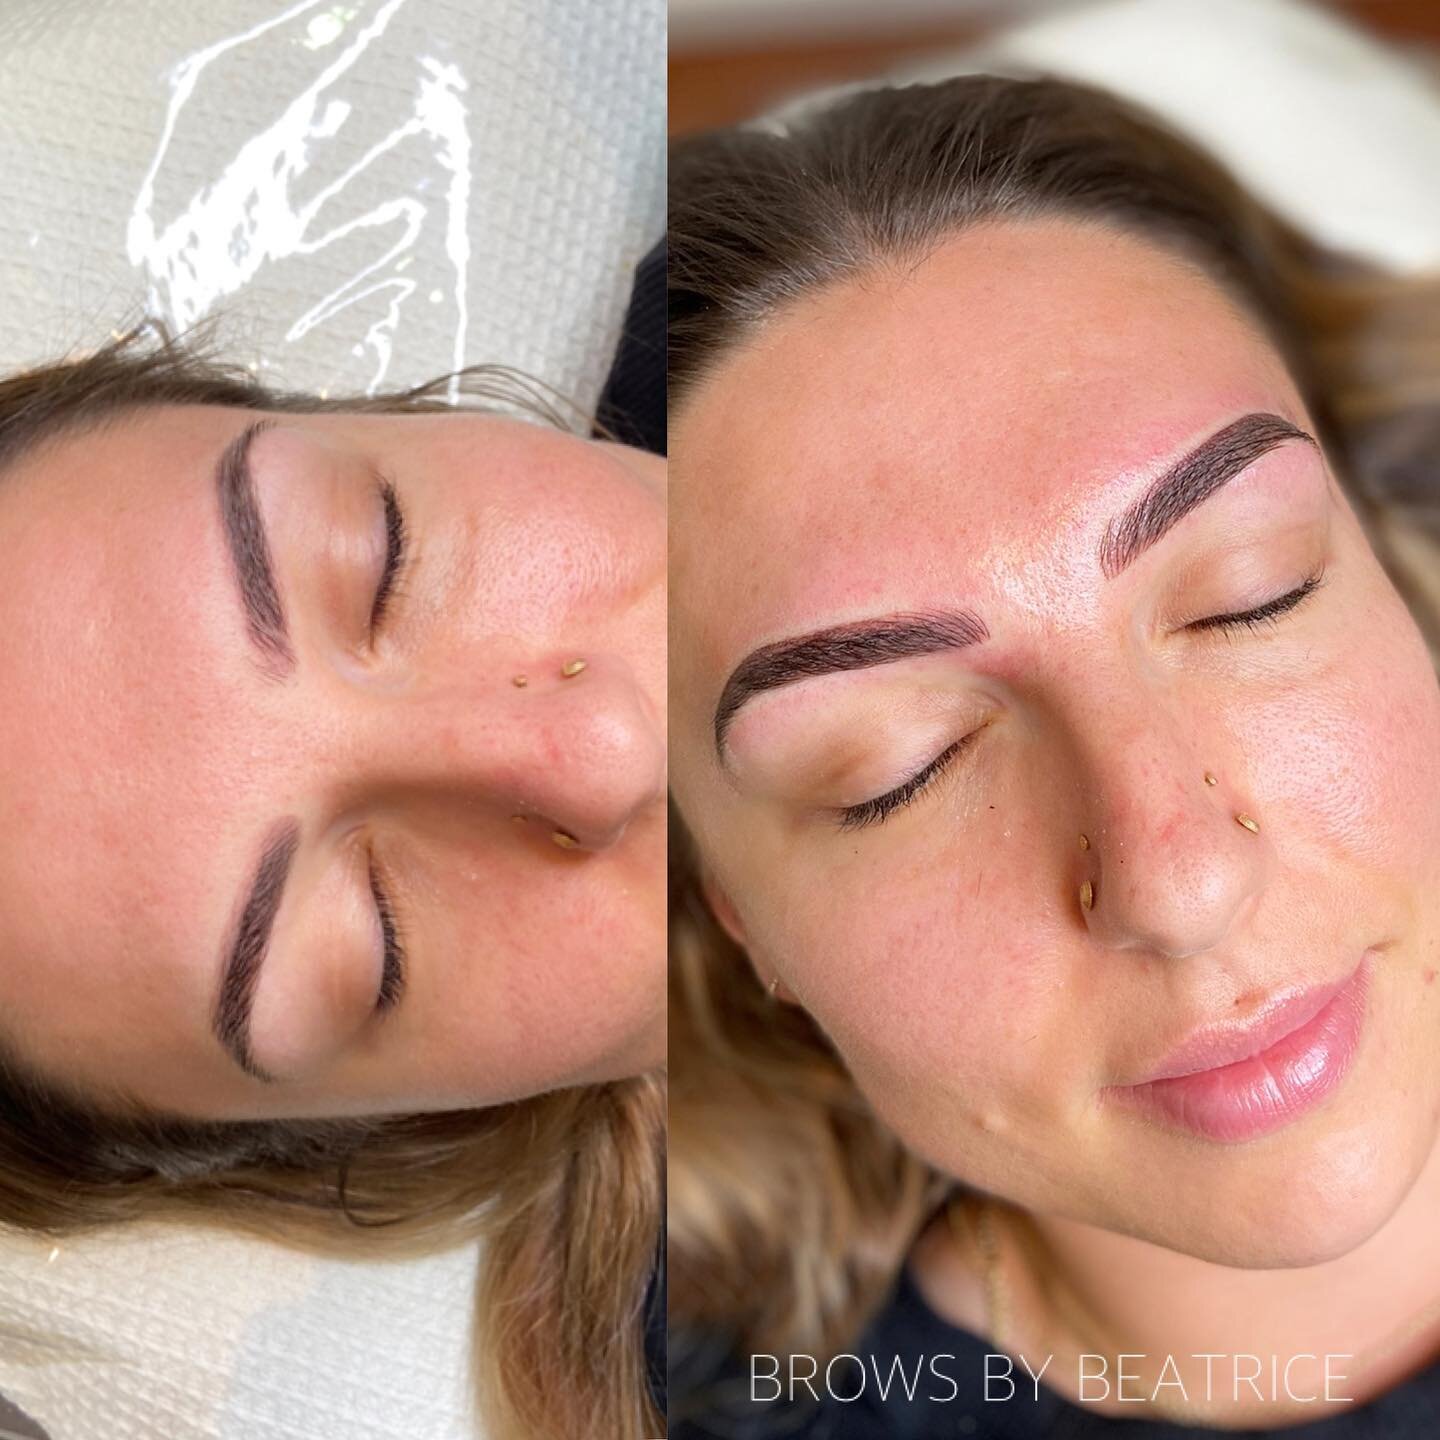 COMBINATION BROWS ✨💓 this was a colour correction + cover up of a faded brow tattoo done elsewhere. 

Are goal was to cover the redness of the previous brow tattoo (visible above the brow) and even out the shape at the front. 

This will require two